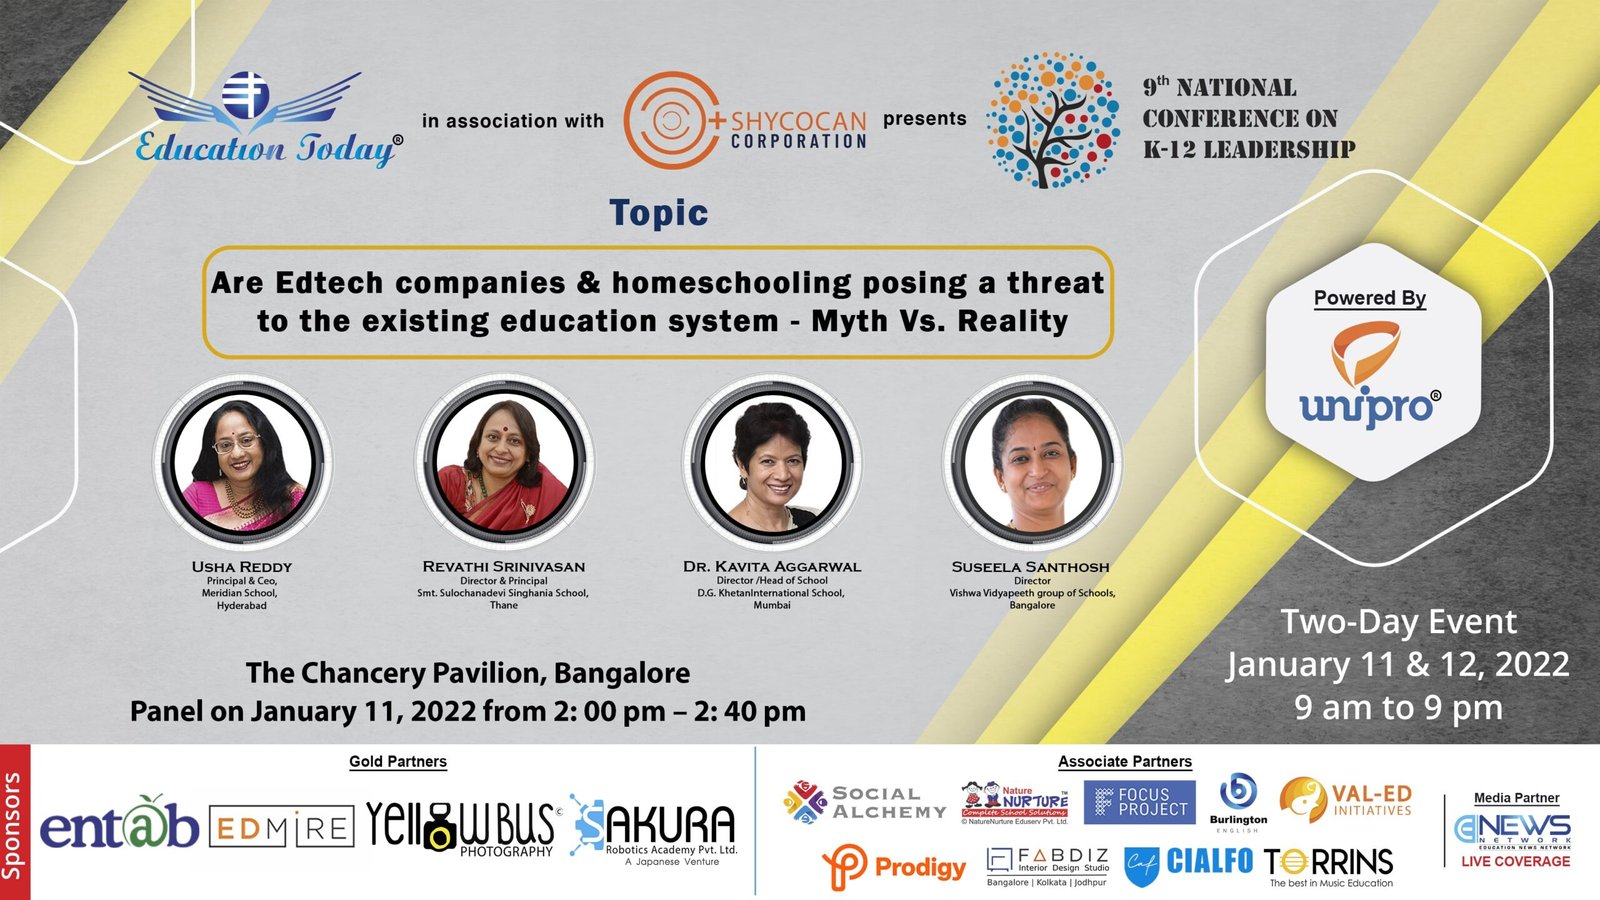 Panel 2- Are Edtech companies & homeschooling posing a threat to the existing education system? - Myth vs. Reality